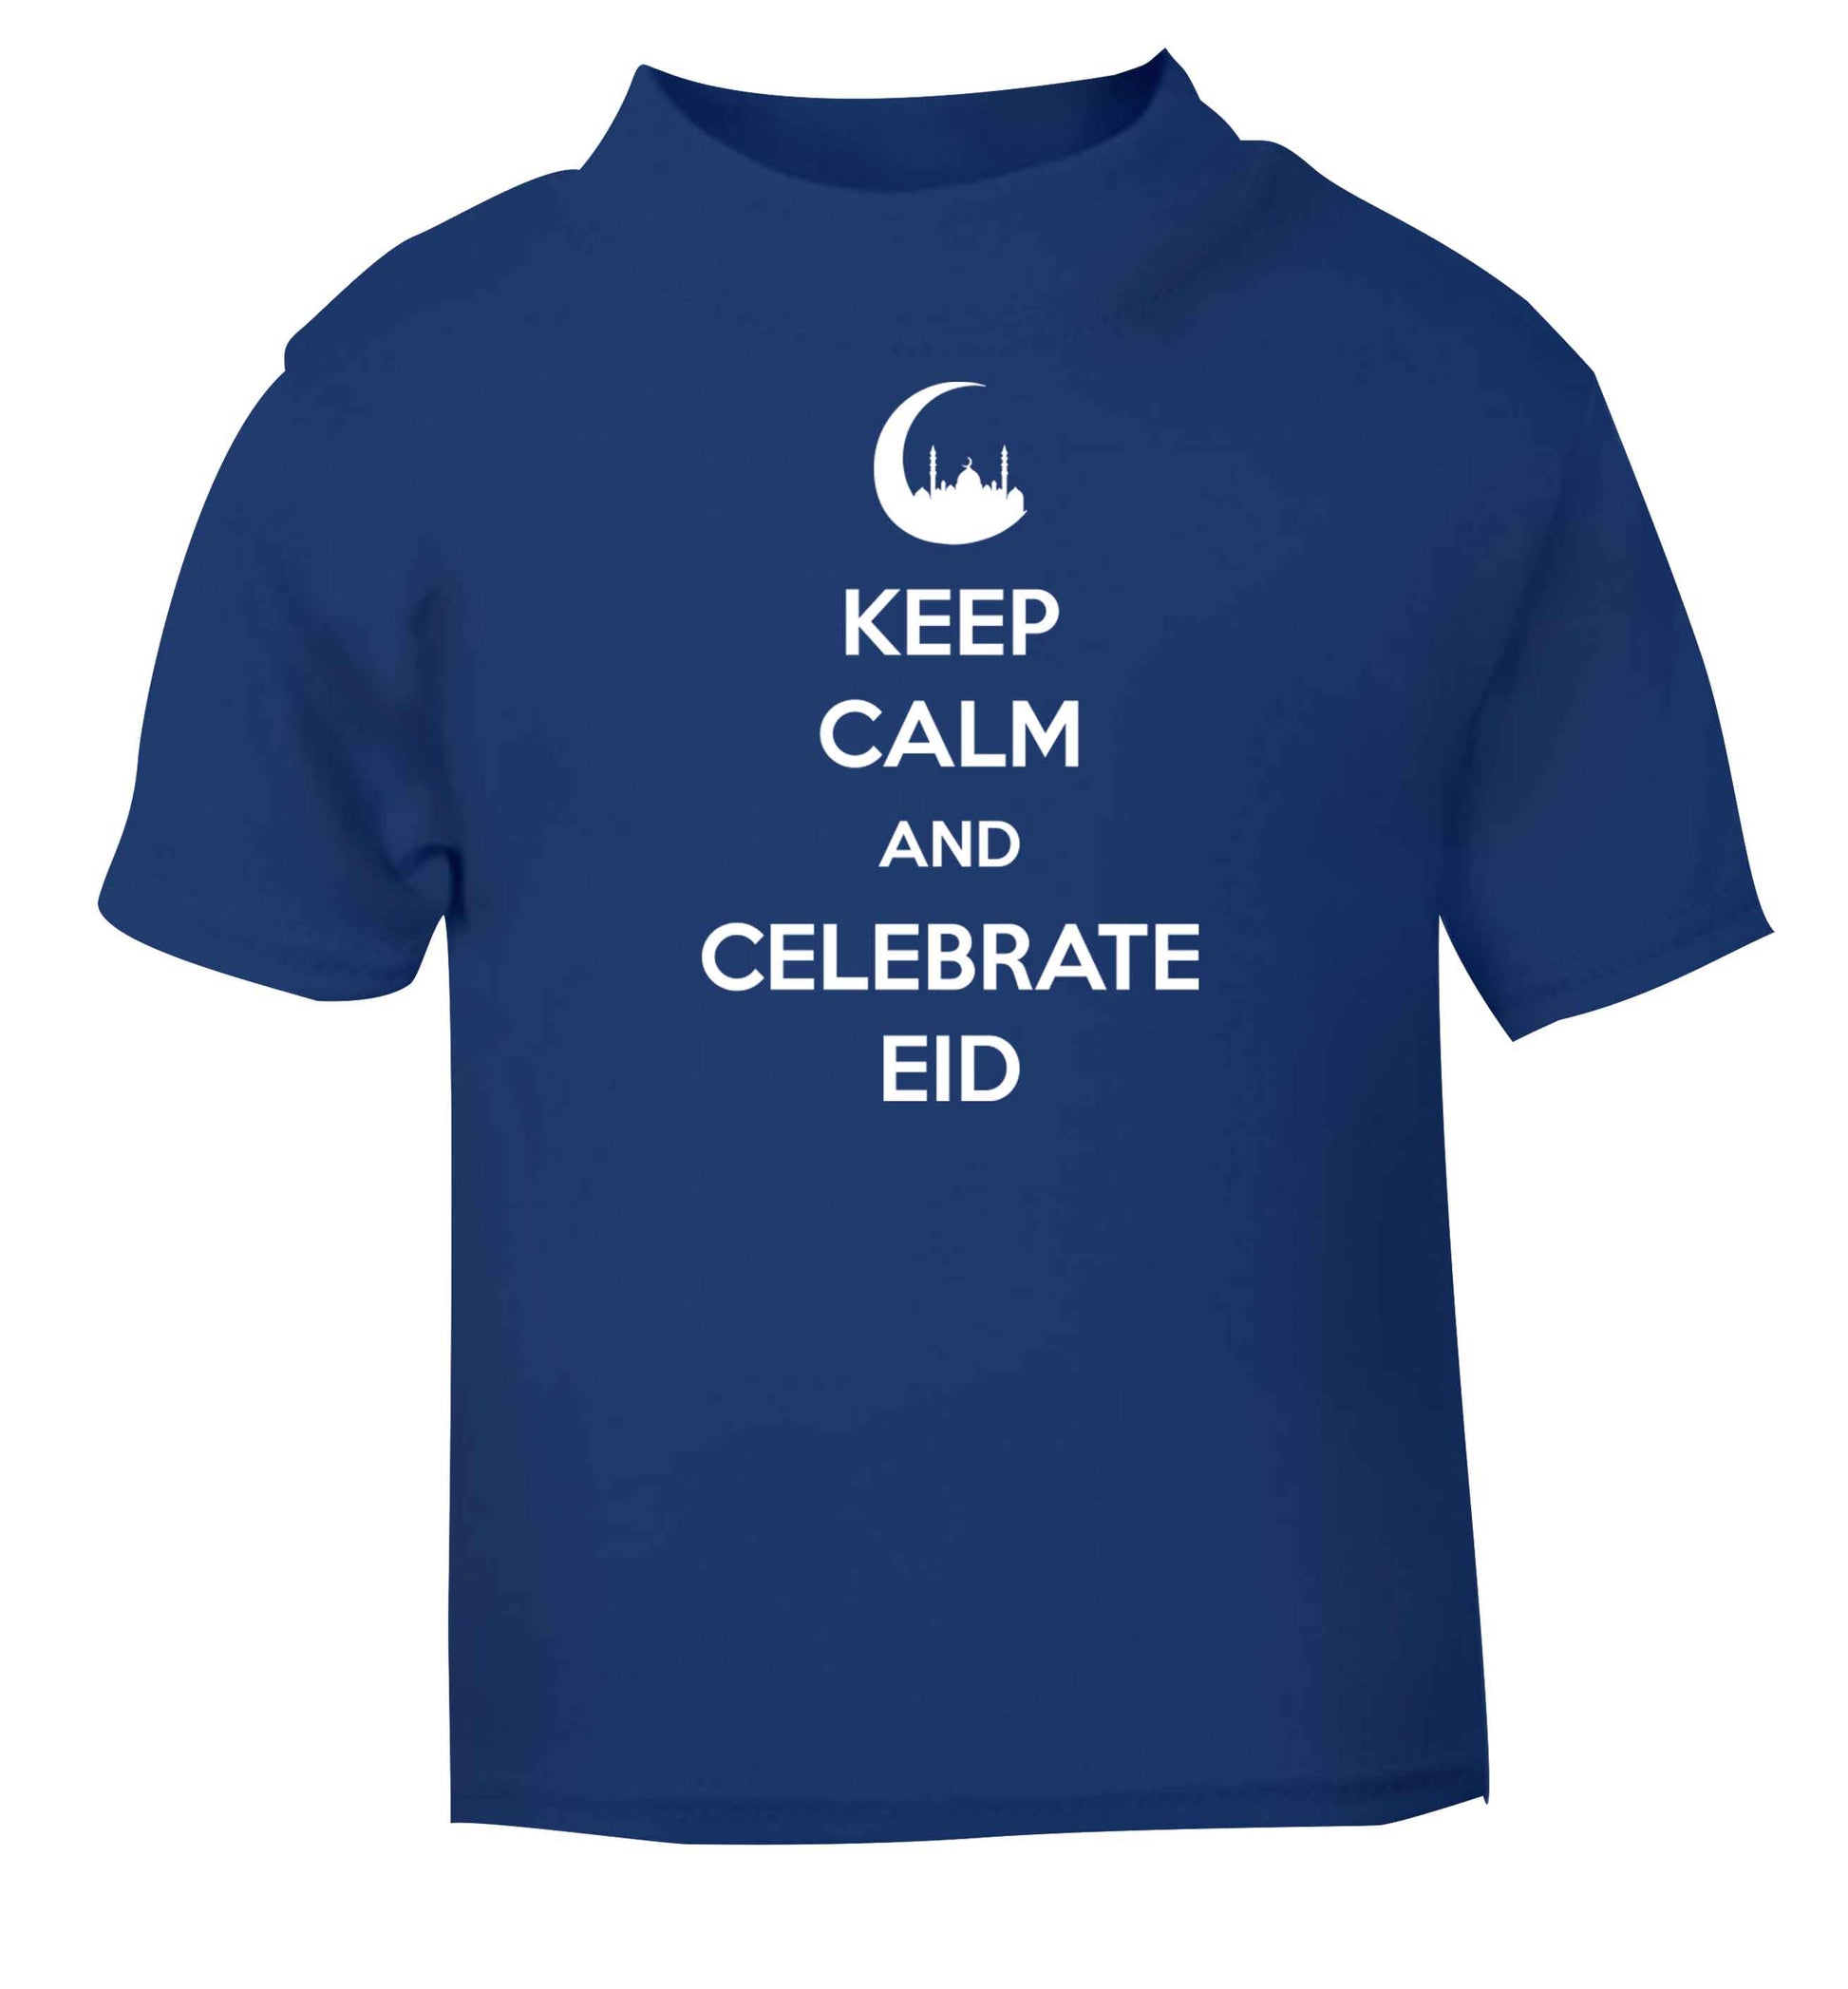 Keep calm and celebrate Eid blue baby toddler Tshirt 2 Years